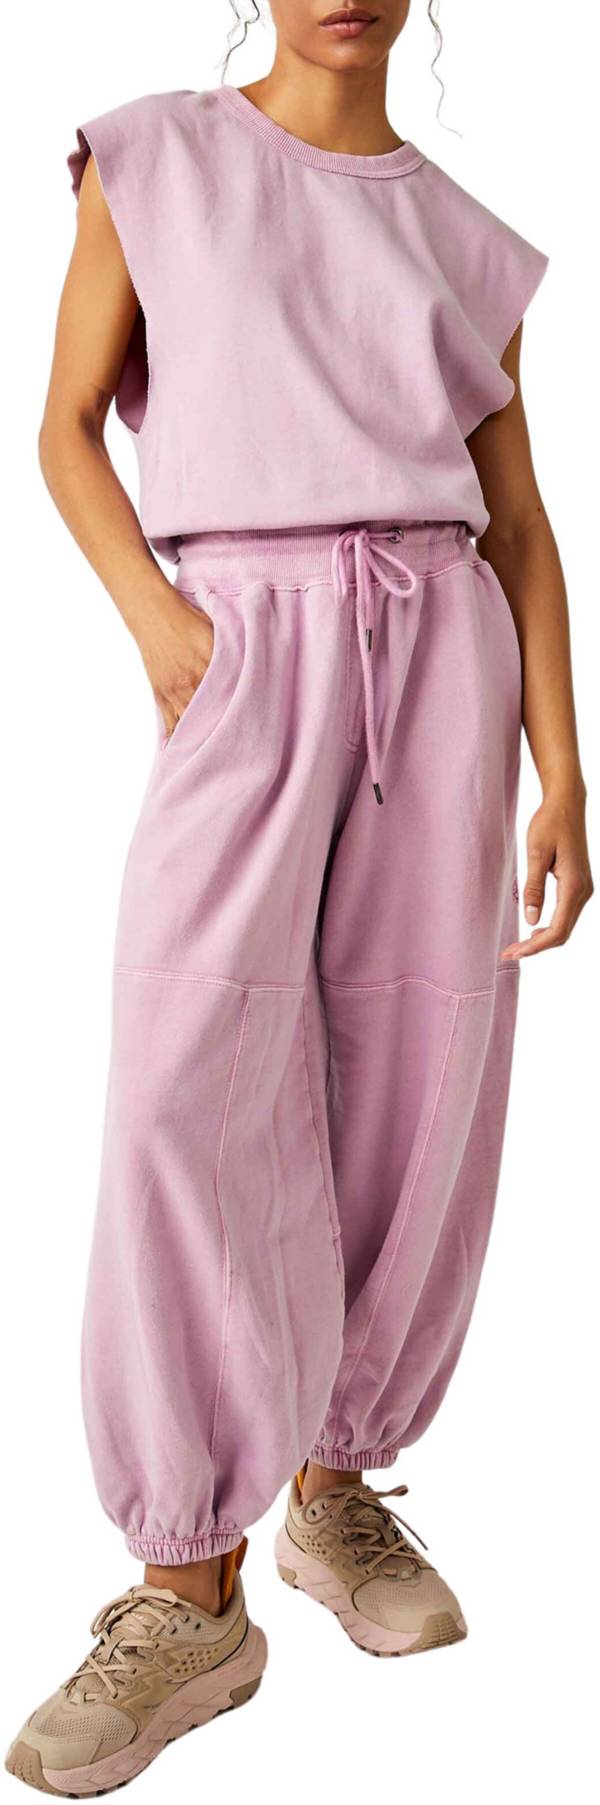 FP Movement Women's Throw And Go Onesie product image